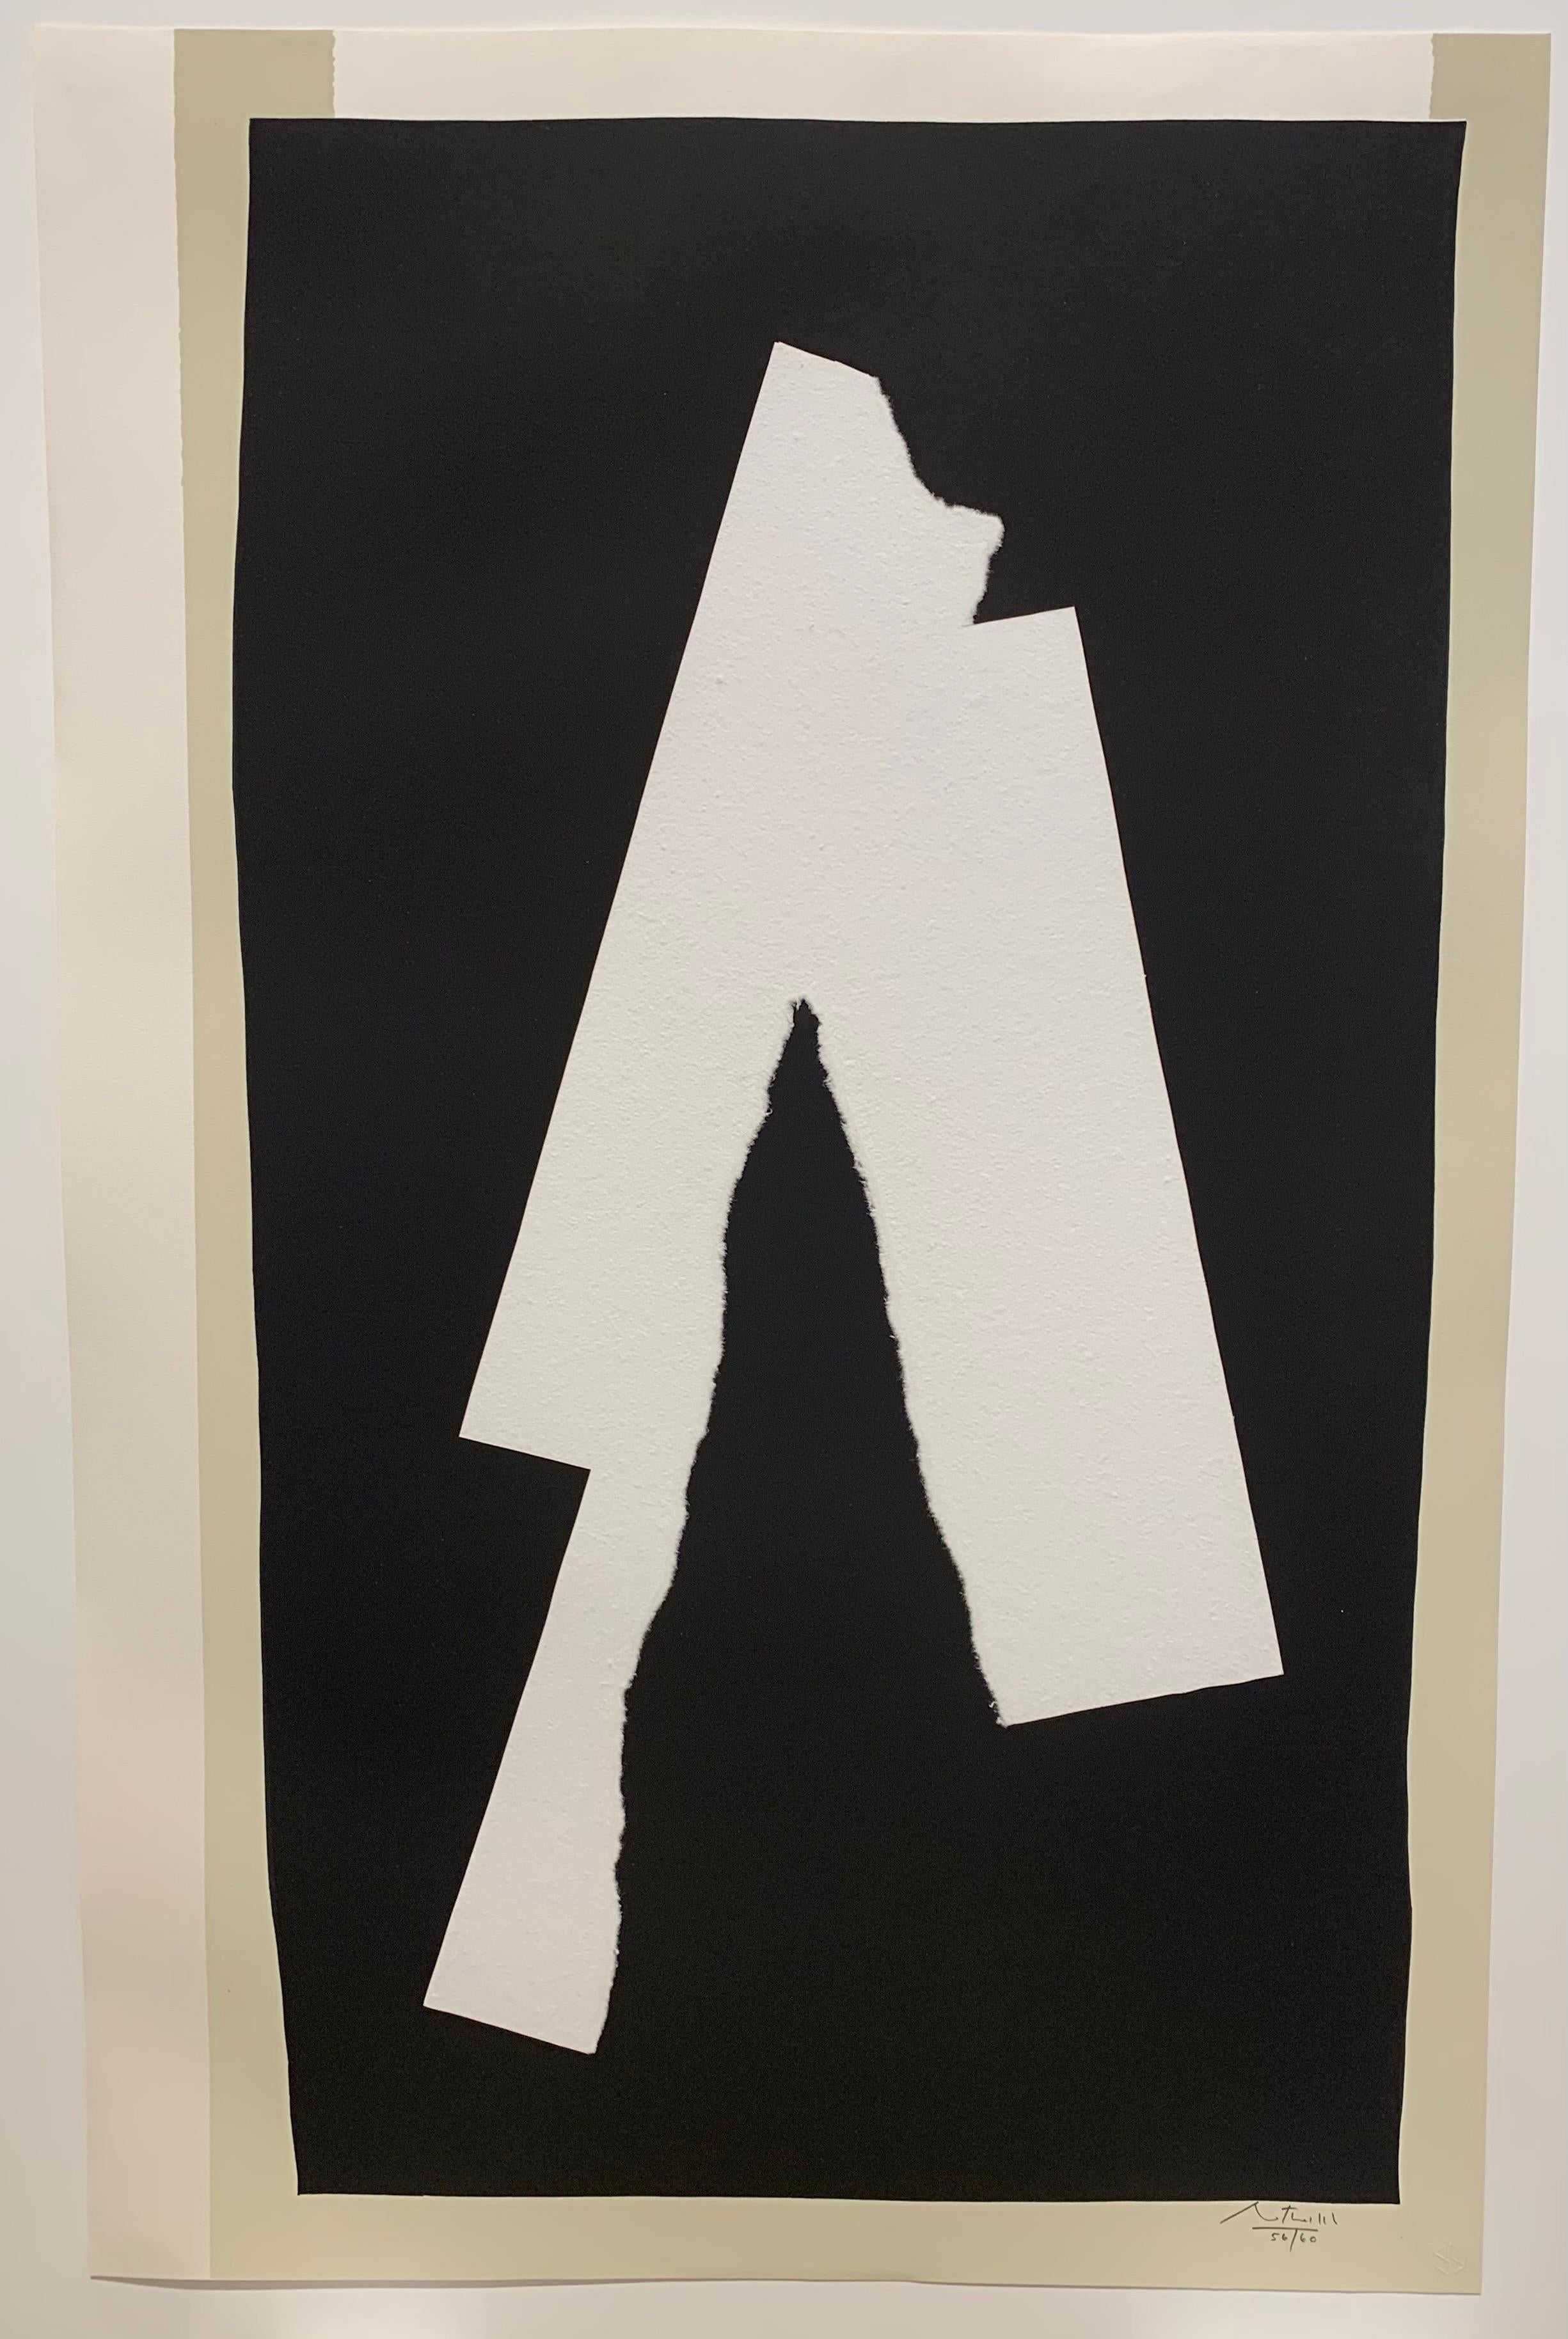 Robert Motherwell
Black Sounds
1984
Lithograph, relief print, and collage
99.1 x 63.5 cms (39 x 25 ins)
RM14197
